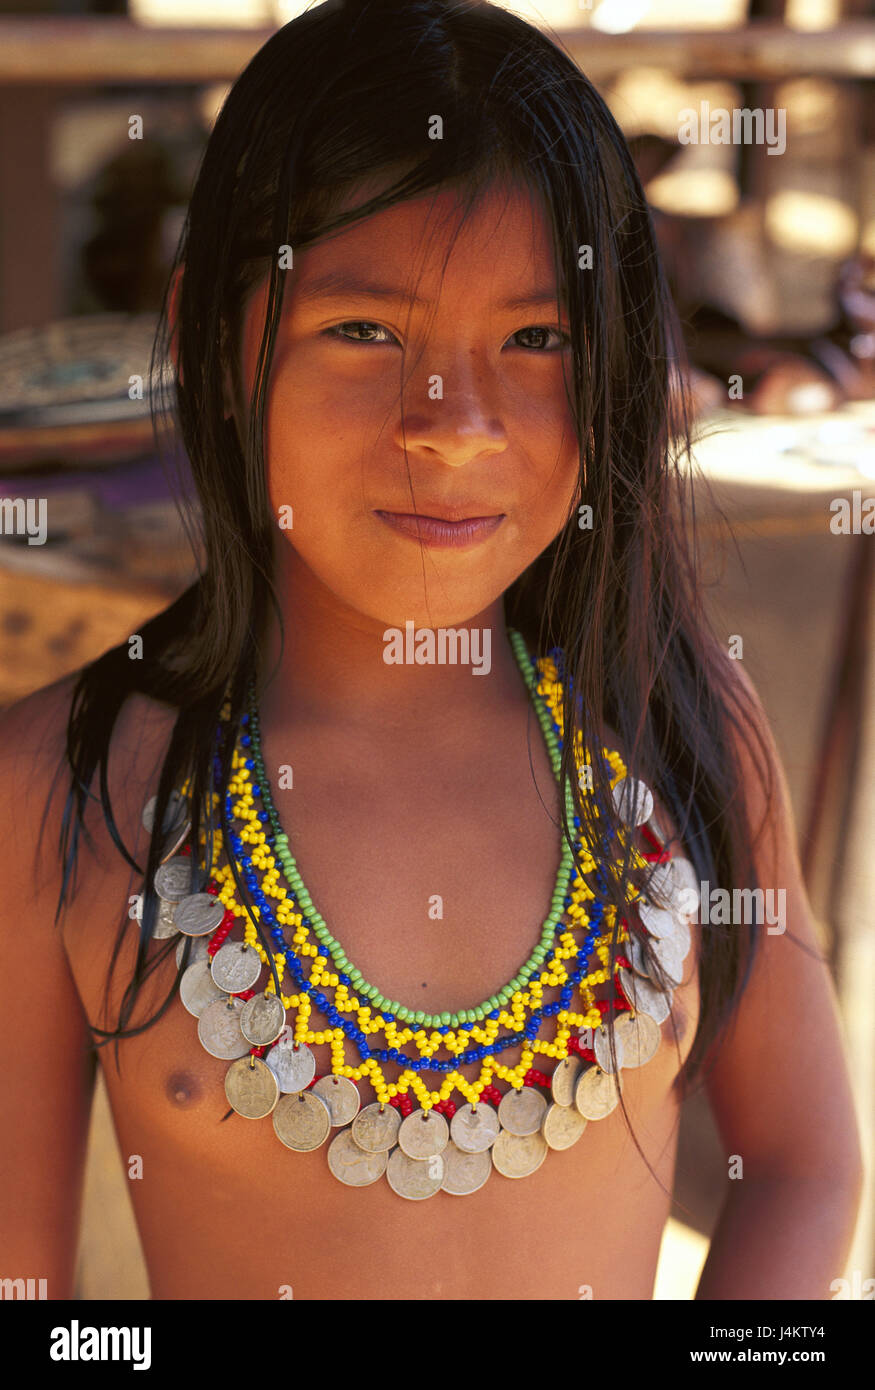 Panama Chagres National Park Embera Indian Girl Portrait No Model Release Central America